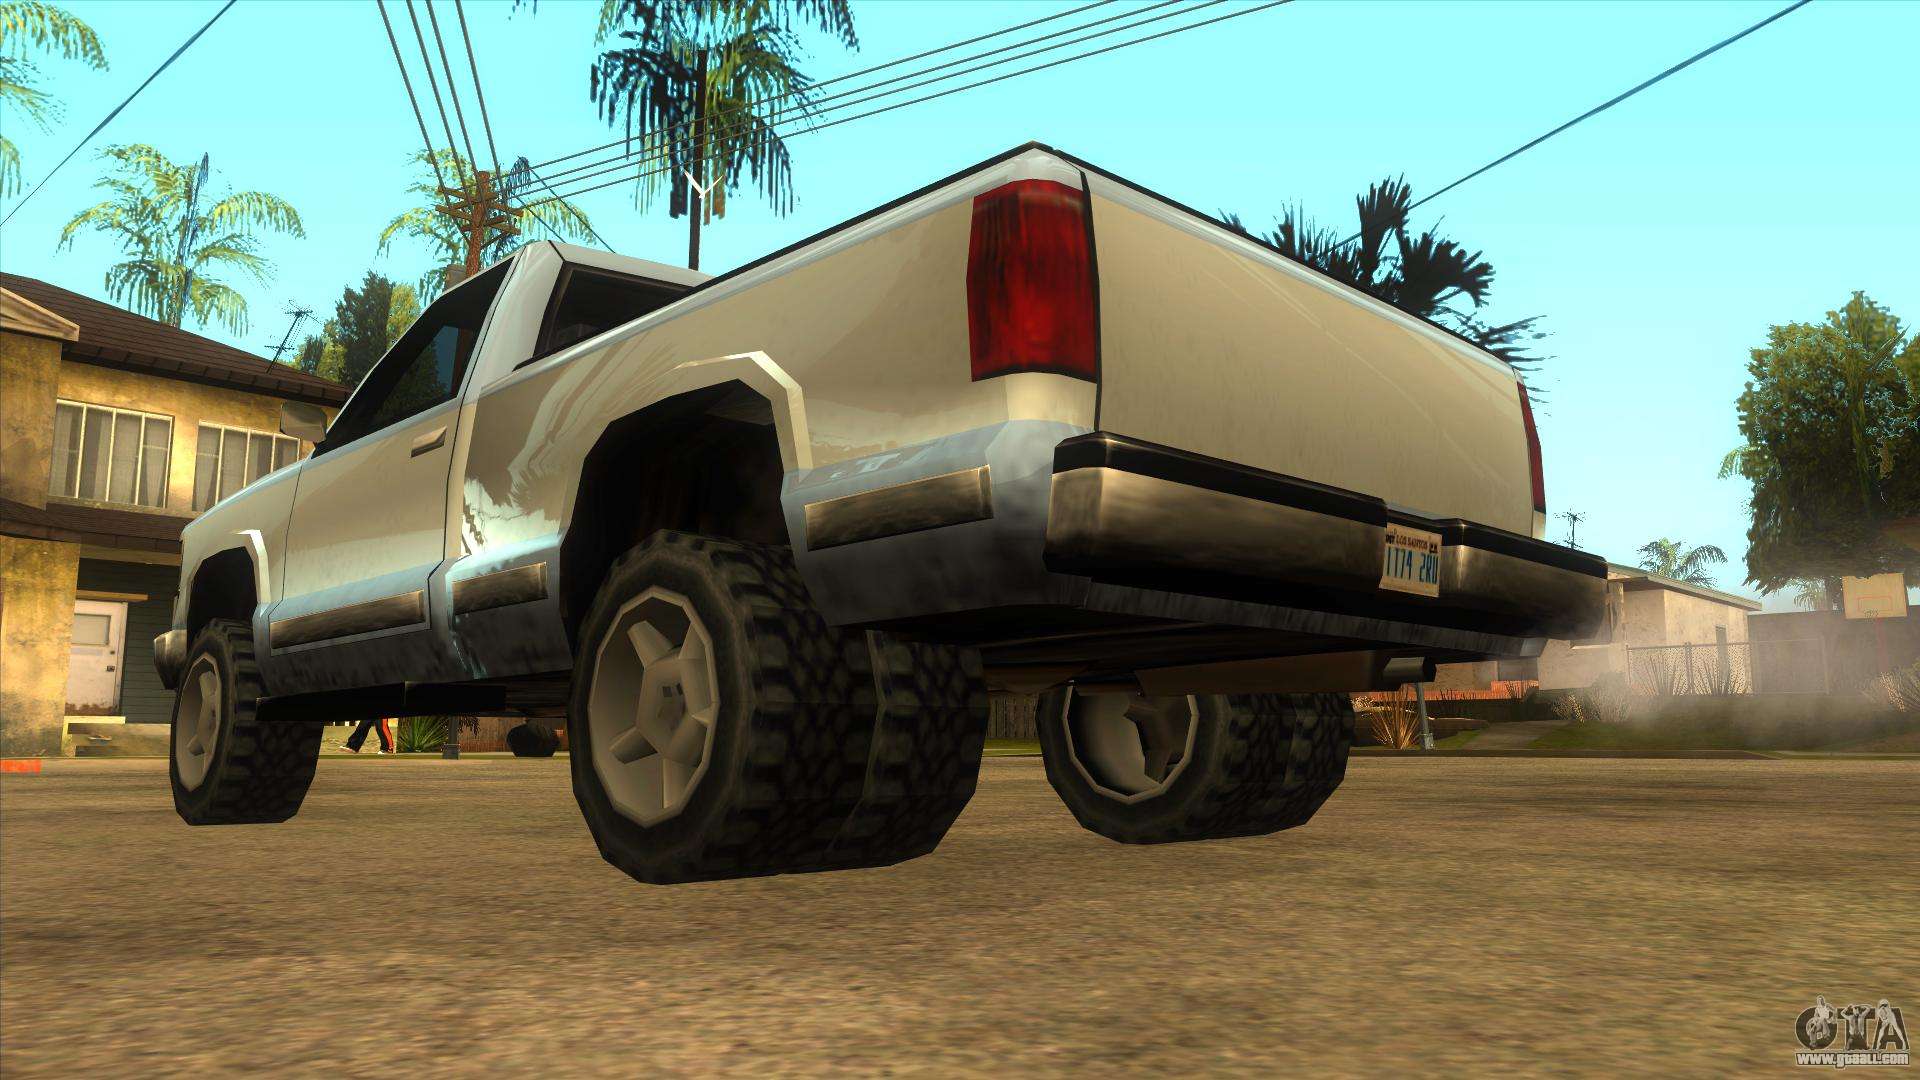 Gta San Andreas Resolution 1920x1080 Patch